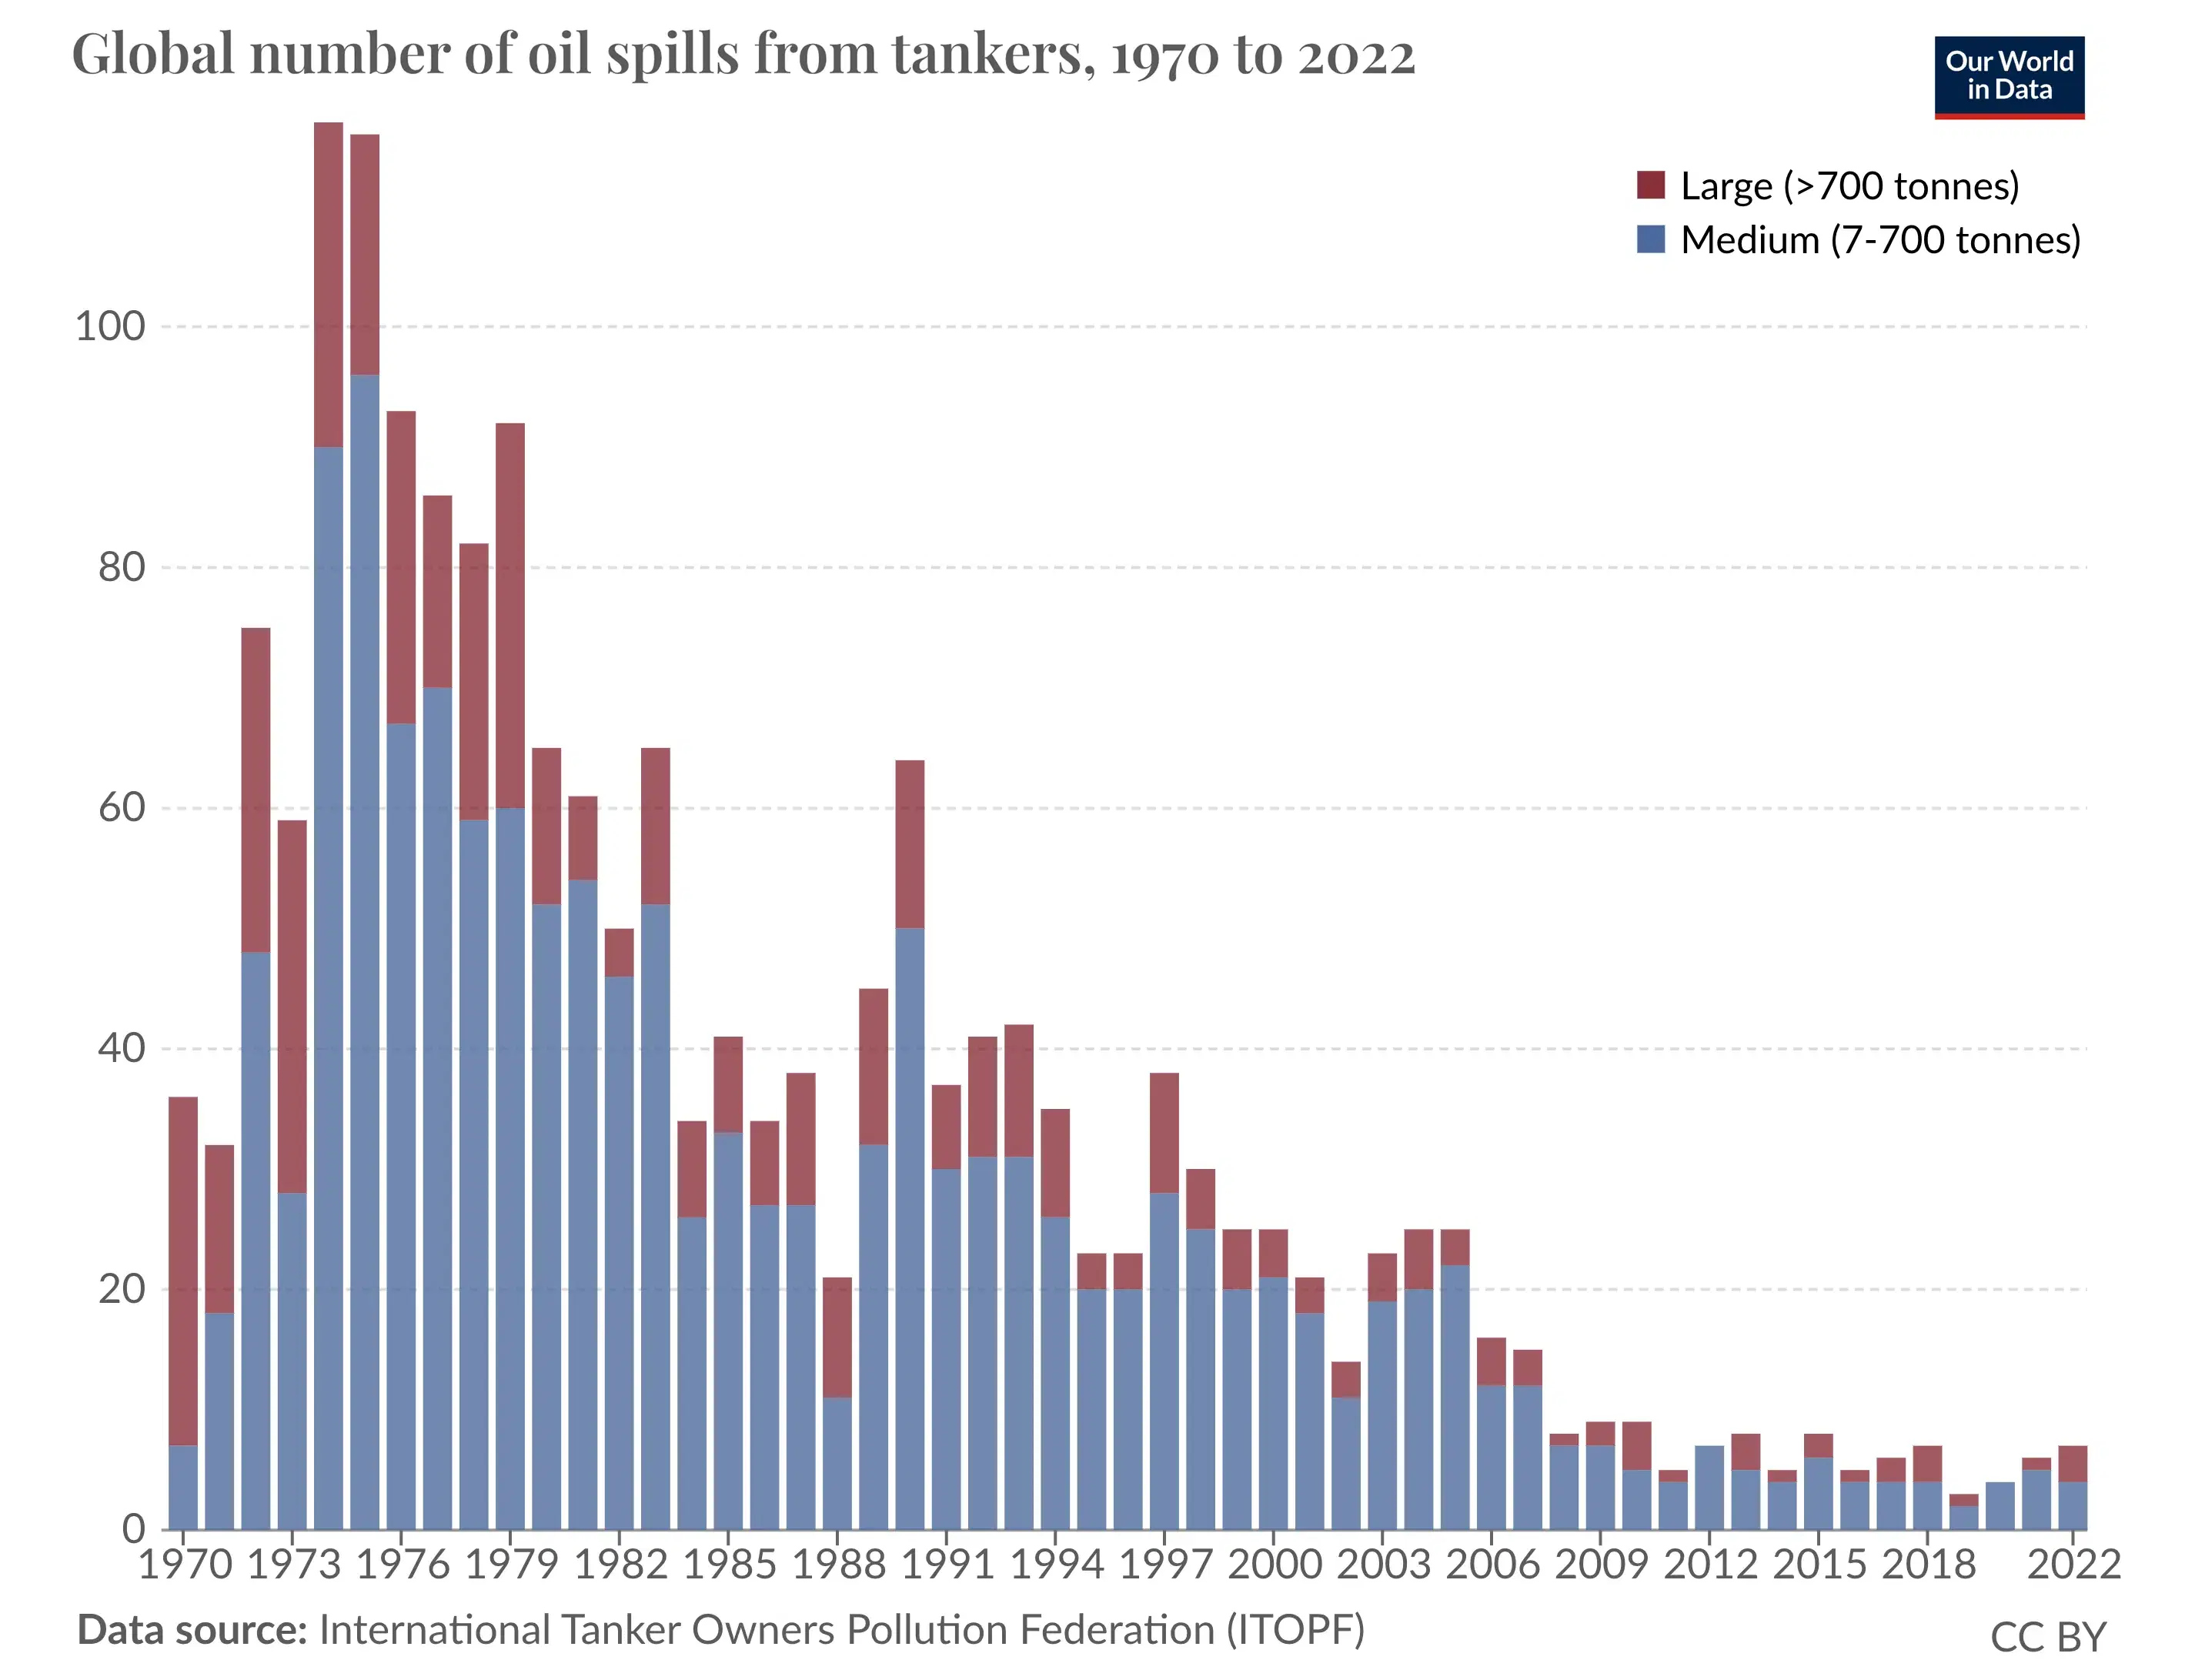 Oil Spills From Tankers Have Fallen by More Than 90% Since the 1970s